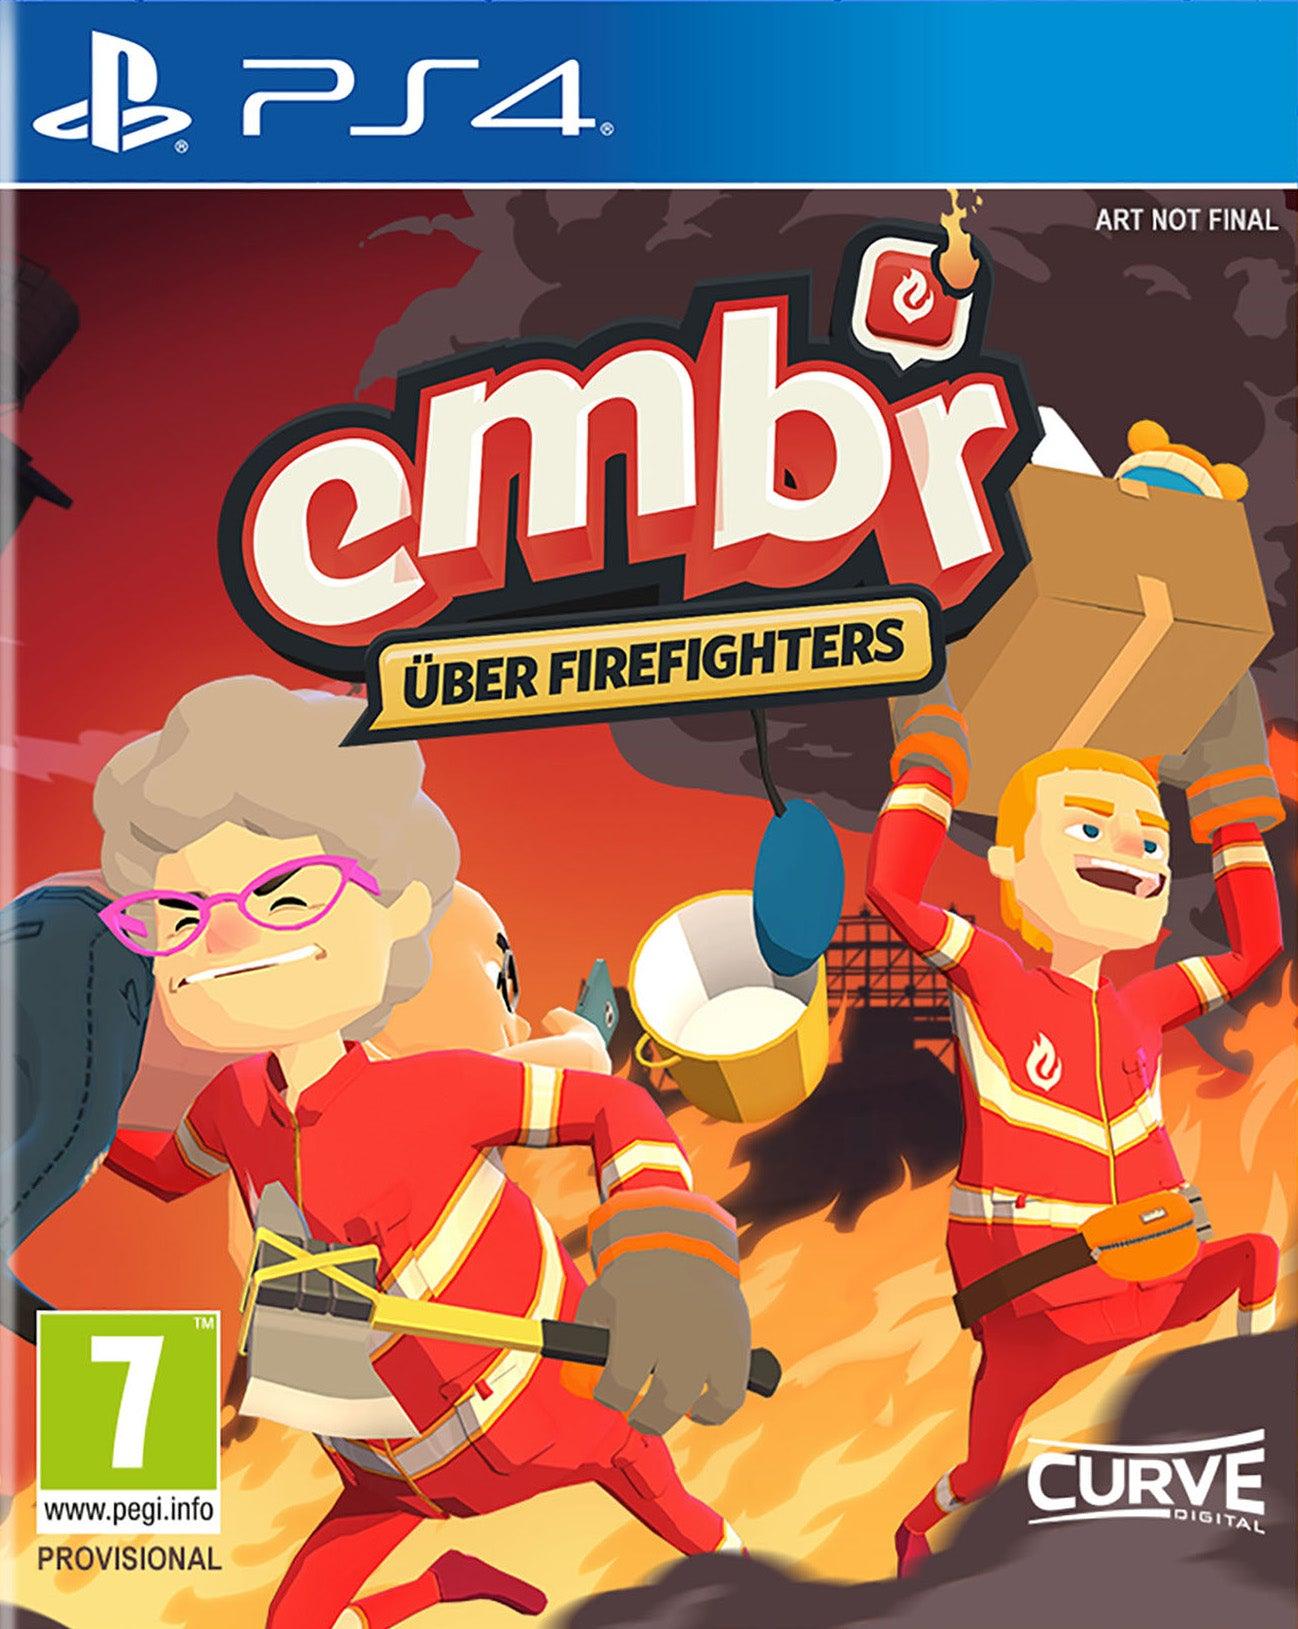 Embr Uber Firefighters - Want a New Gadget